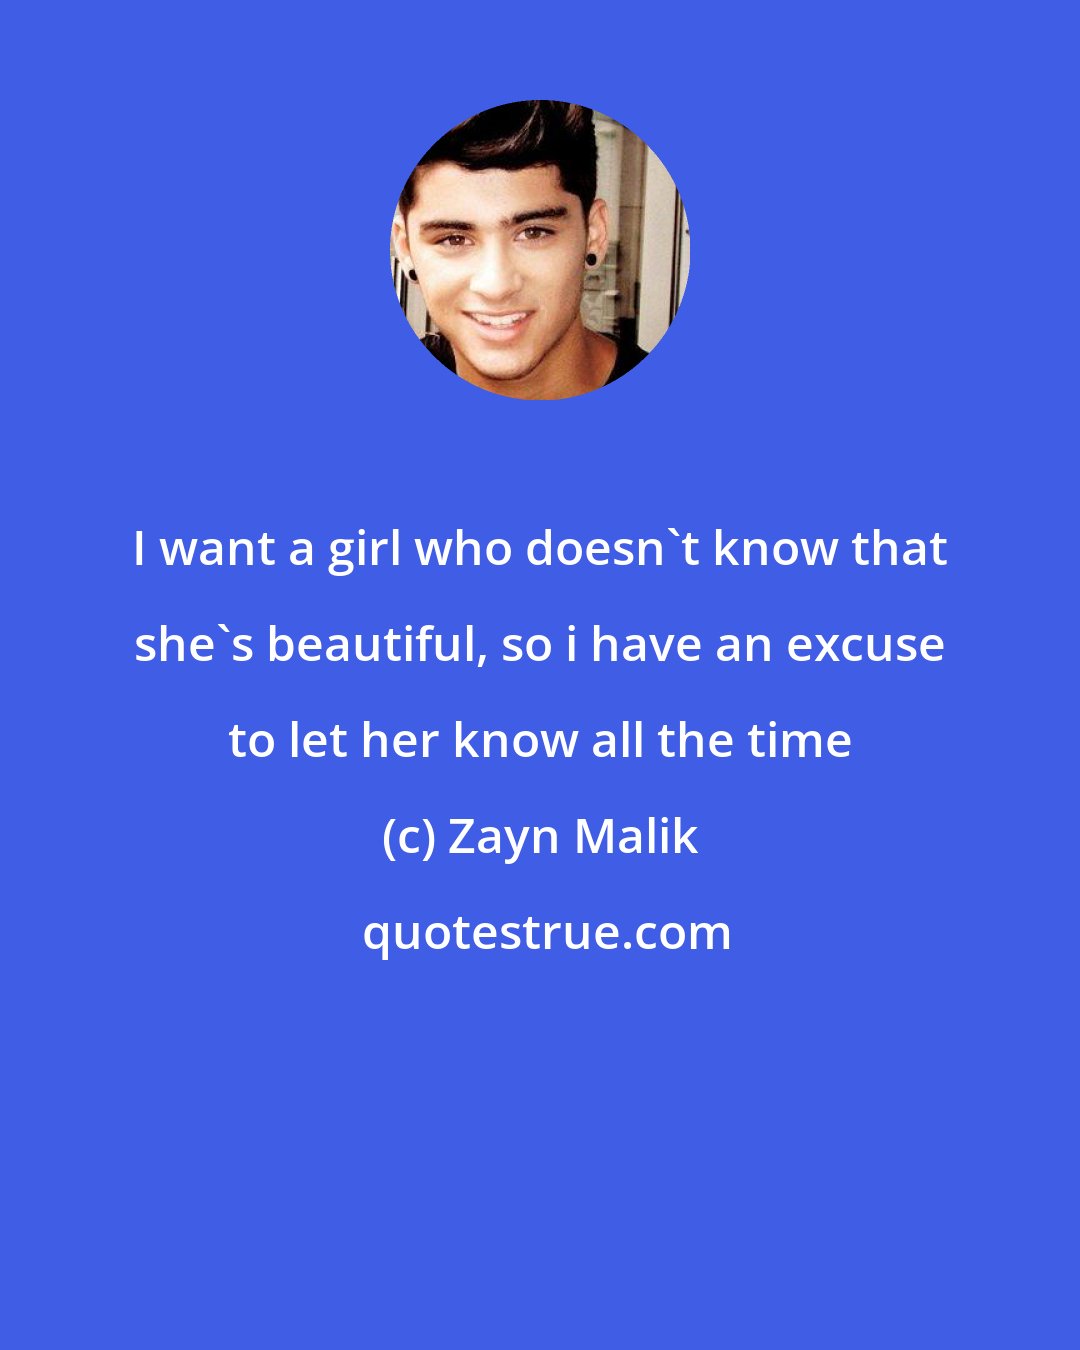 Zayn Malik: I want a girl who doesn't know that she's beautiful, so i have an excuse to let her know all the time